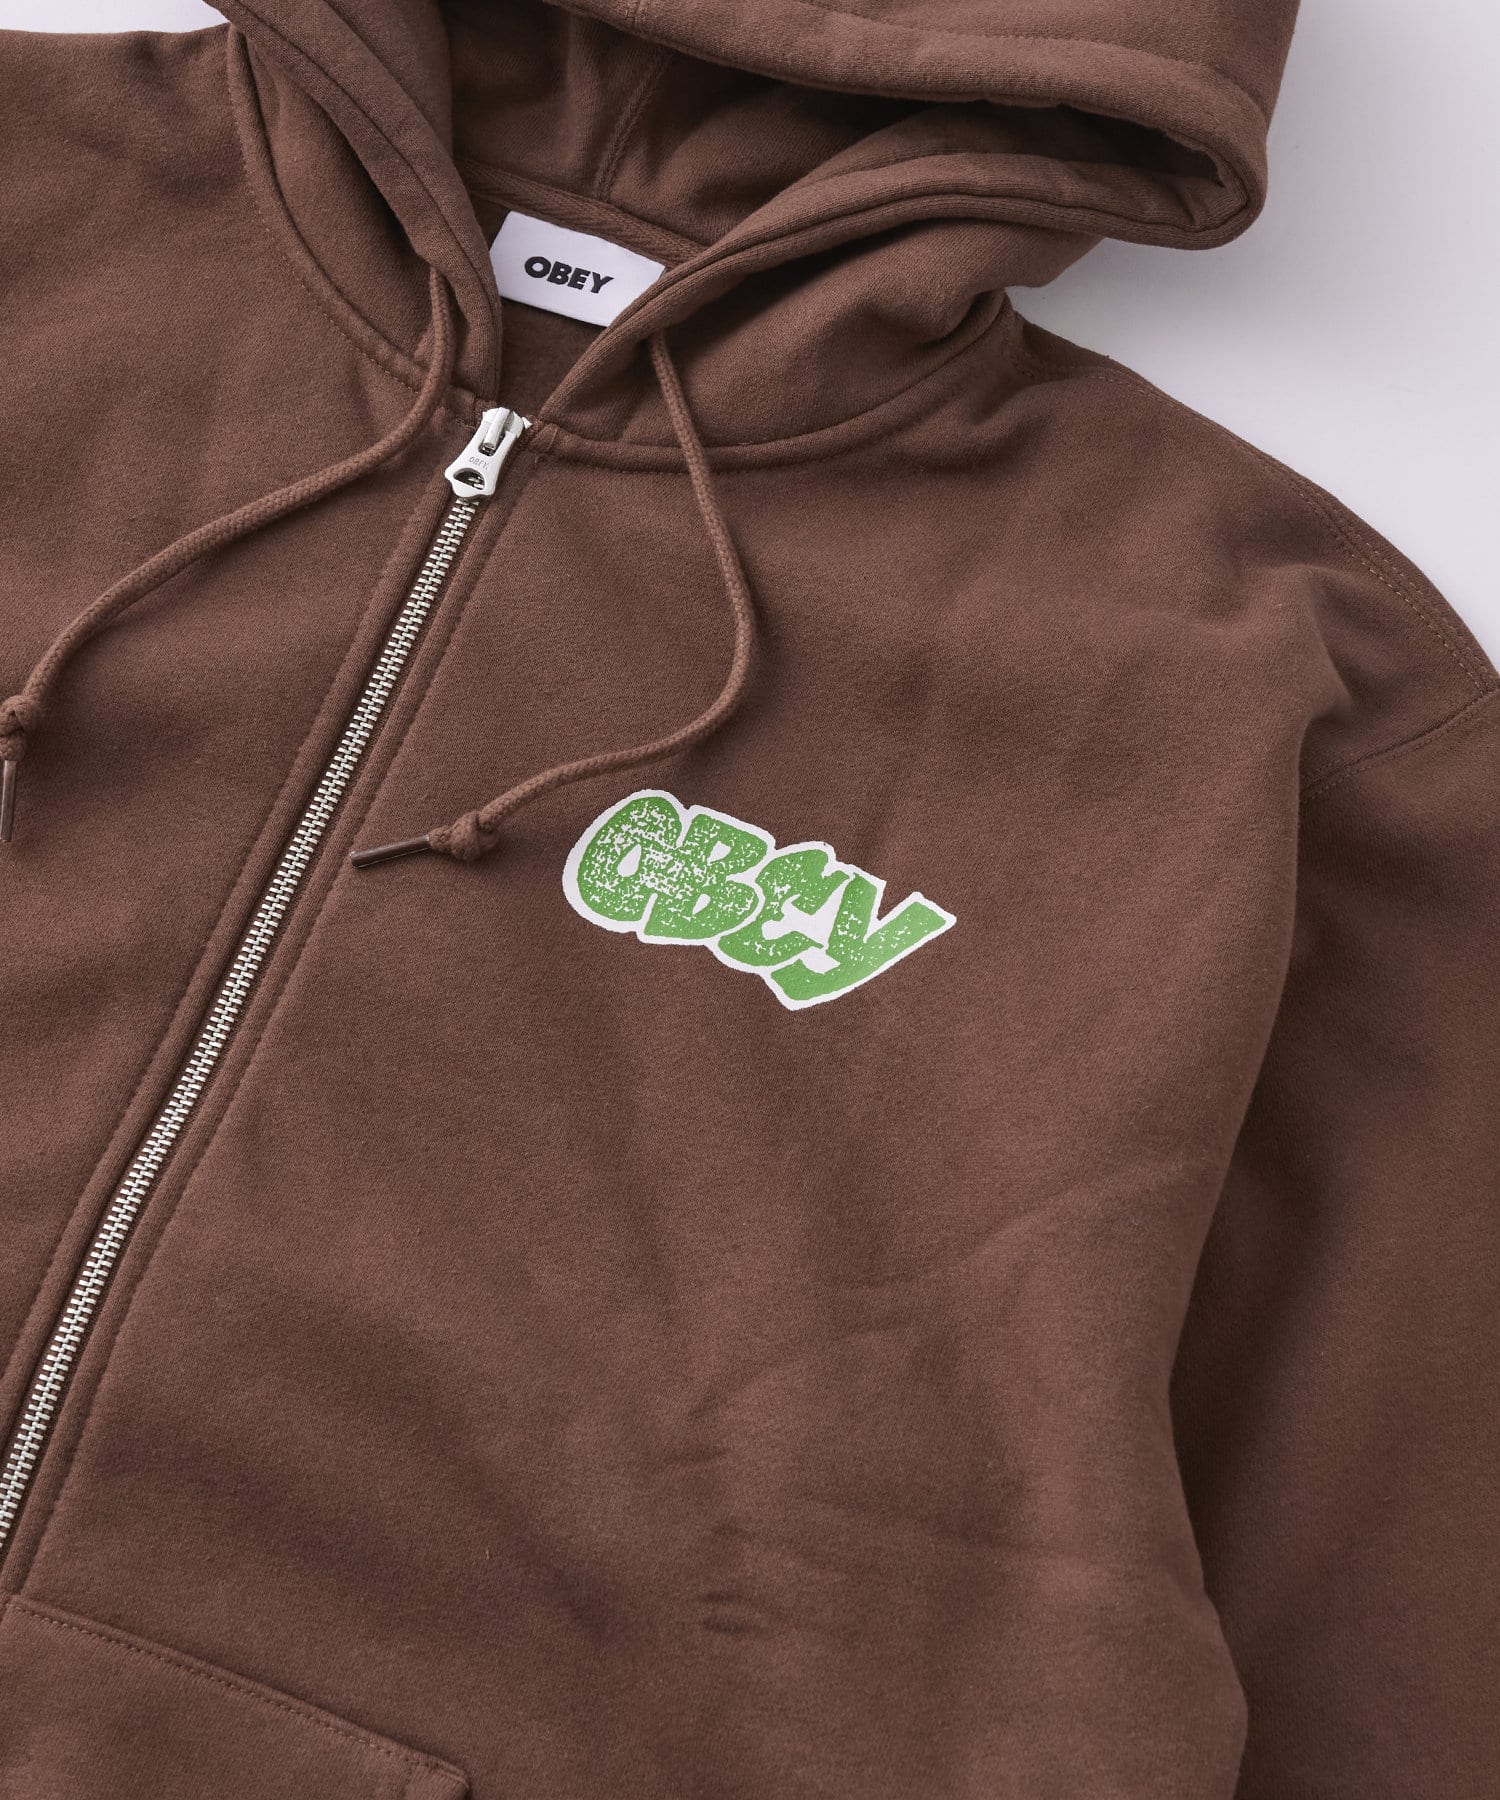 OBEY CITY WATCH DOG ZIP HOOD | WHO'S WHO gallery(フーズフー